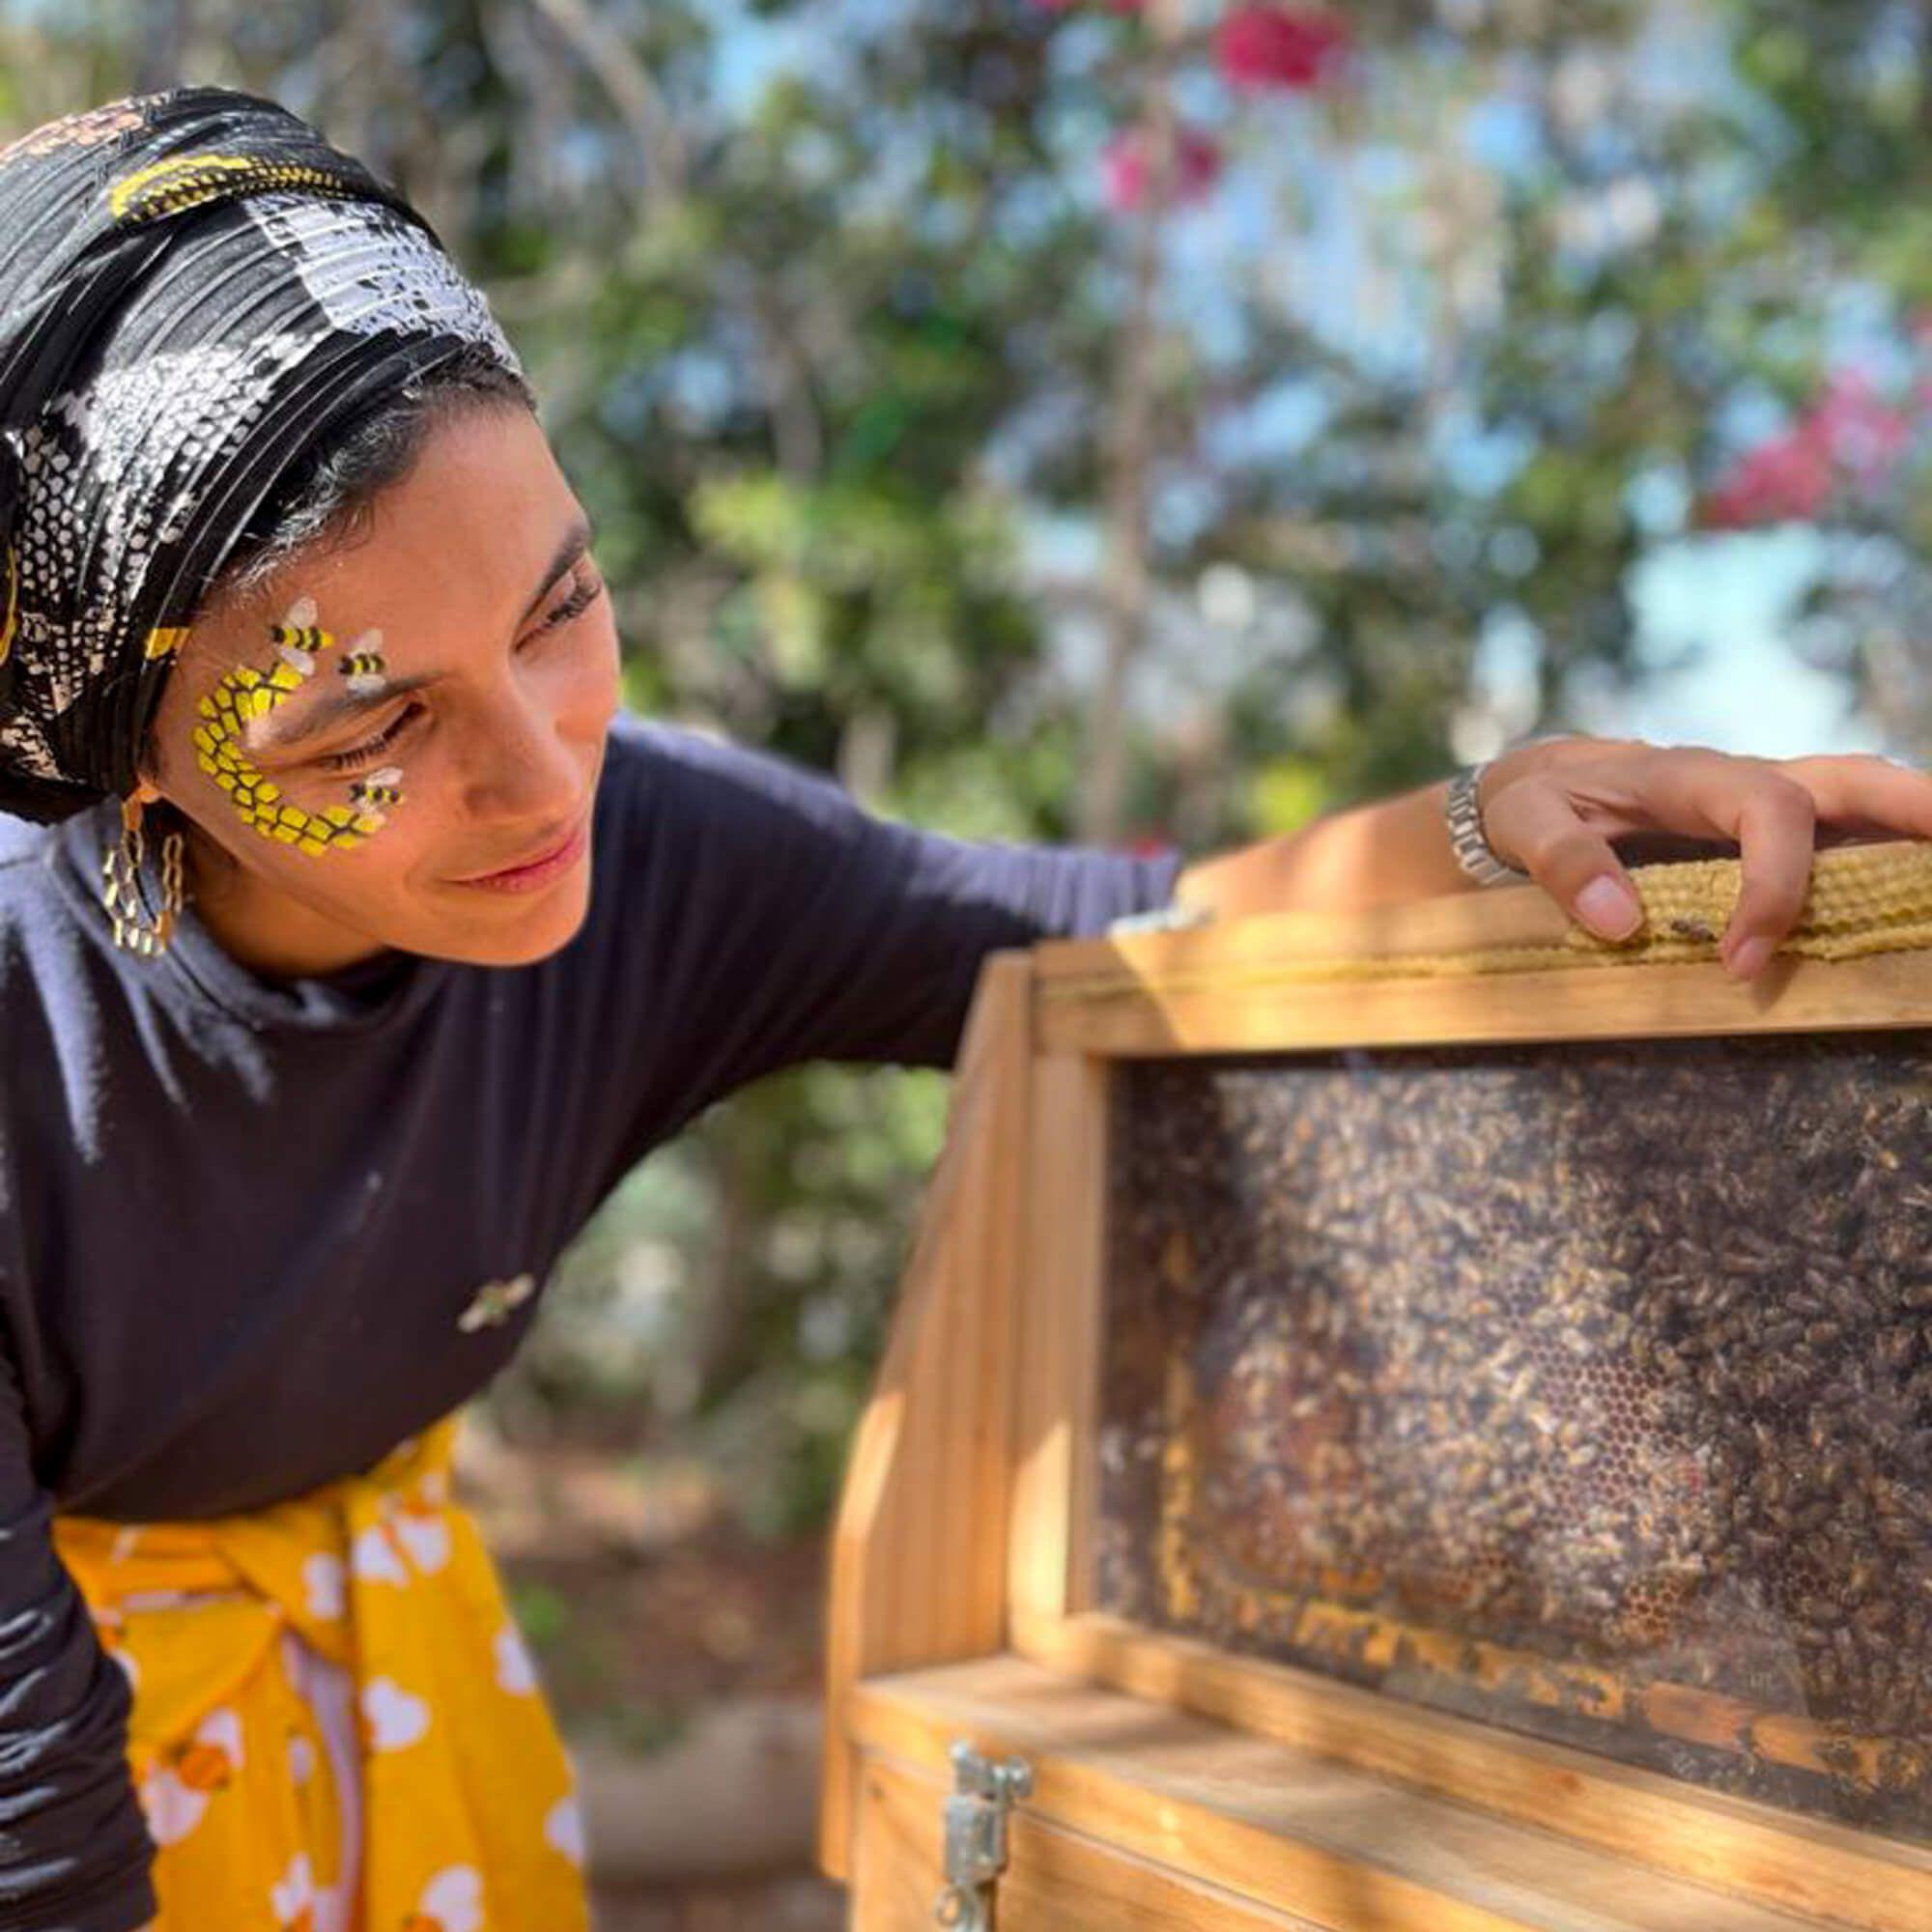 Meriem, aka the Beefairy Lady, checks on a few of the bees, ensuring all are safe and sound. 
Photo: One Hive